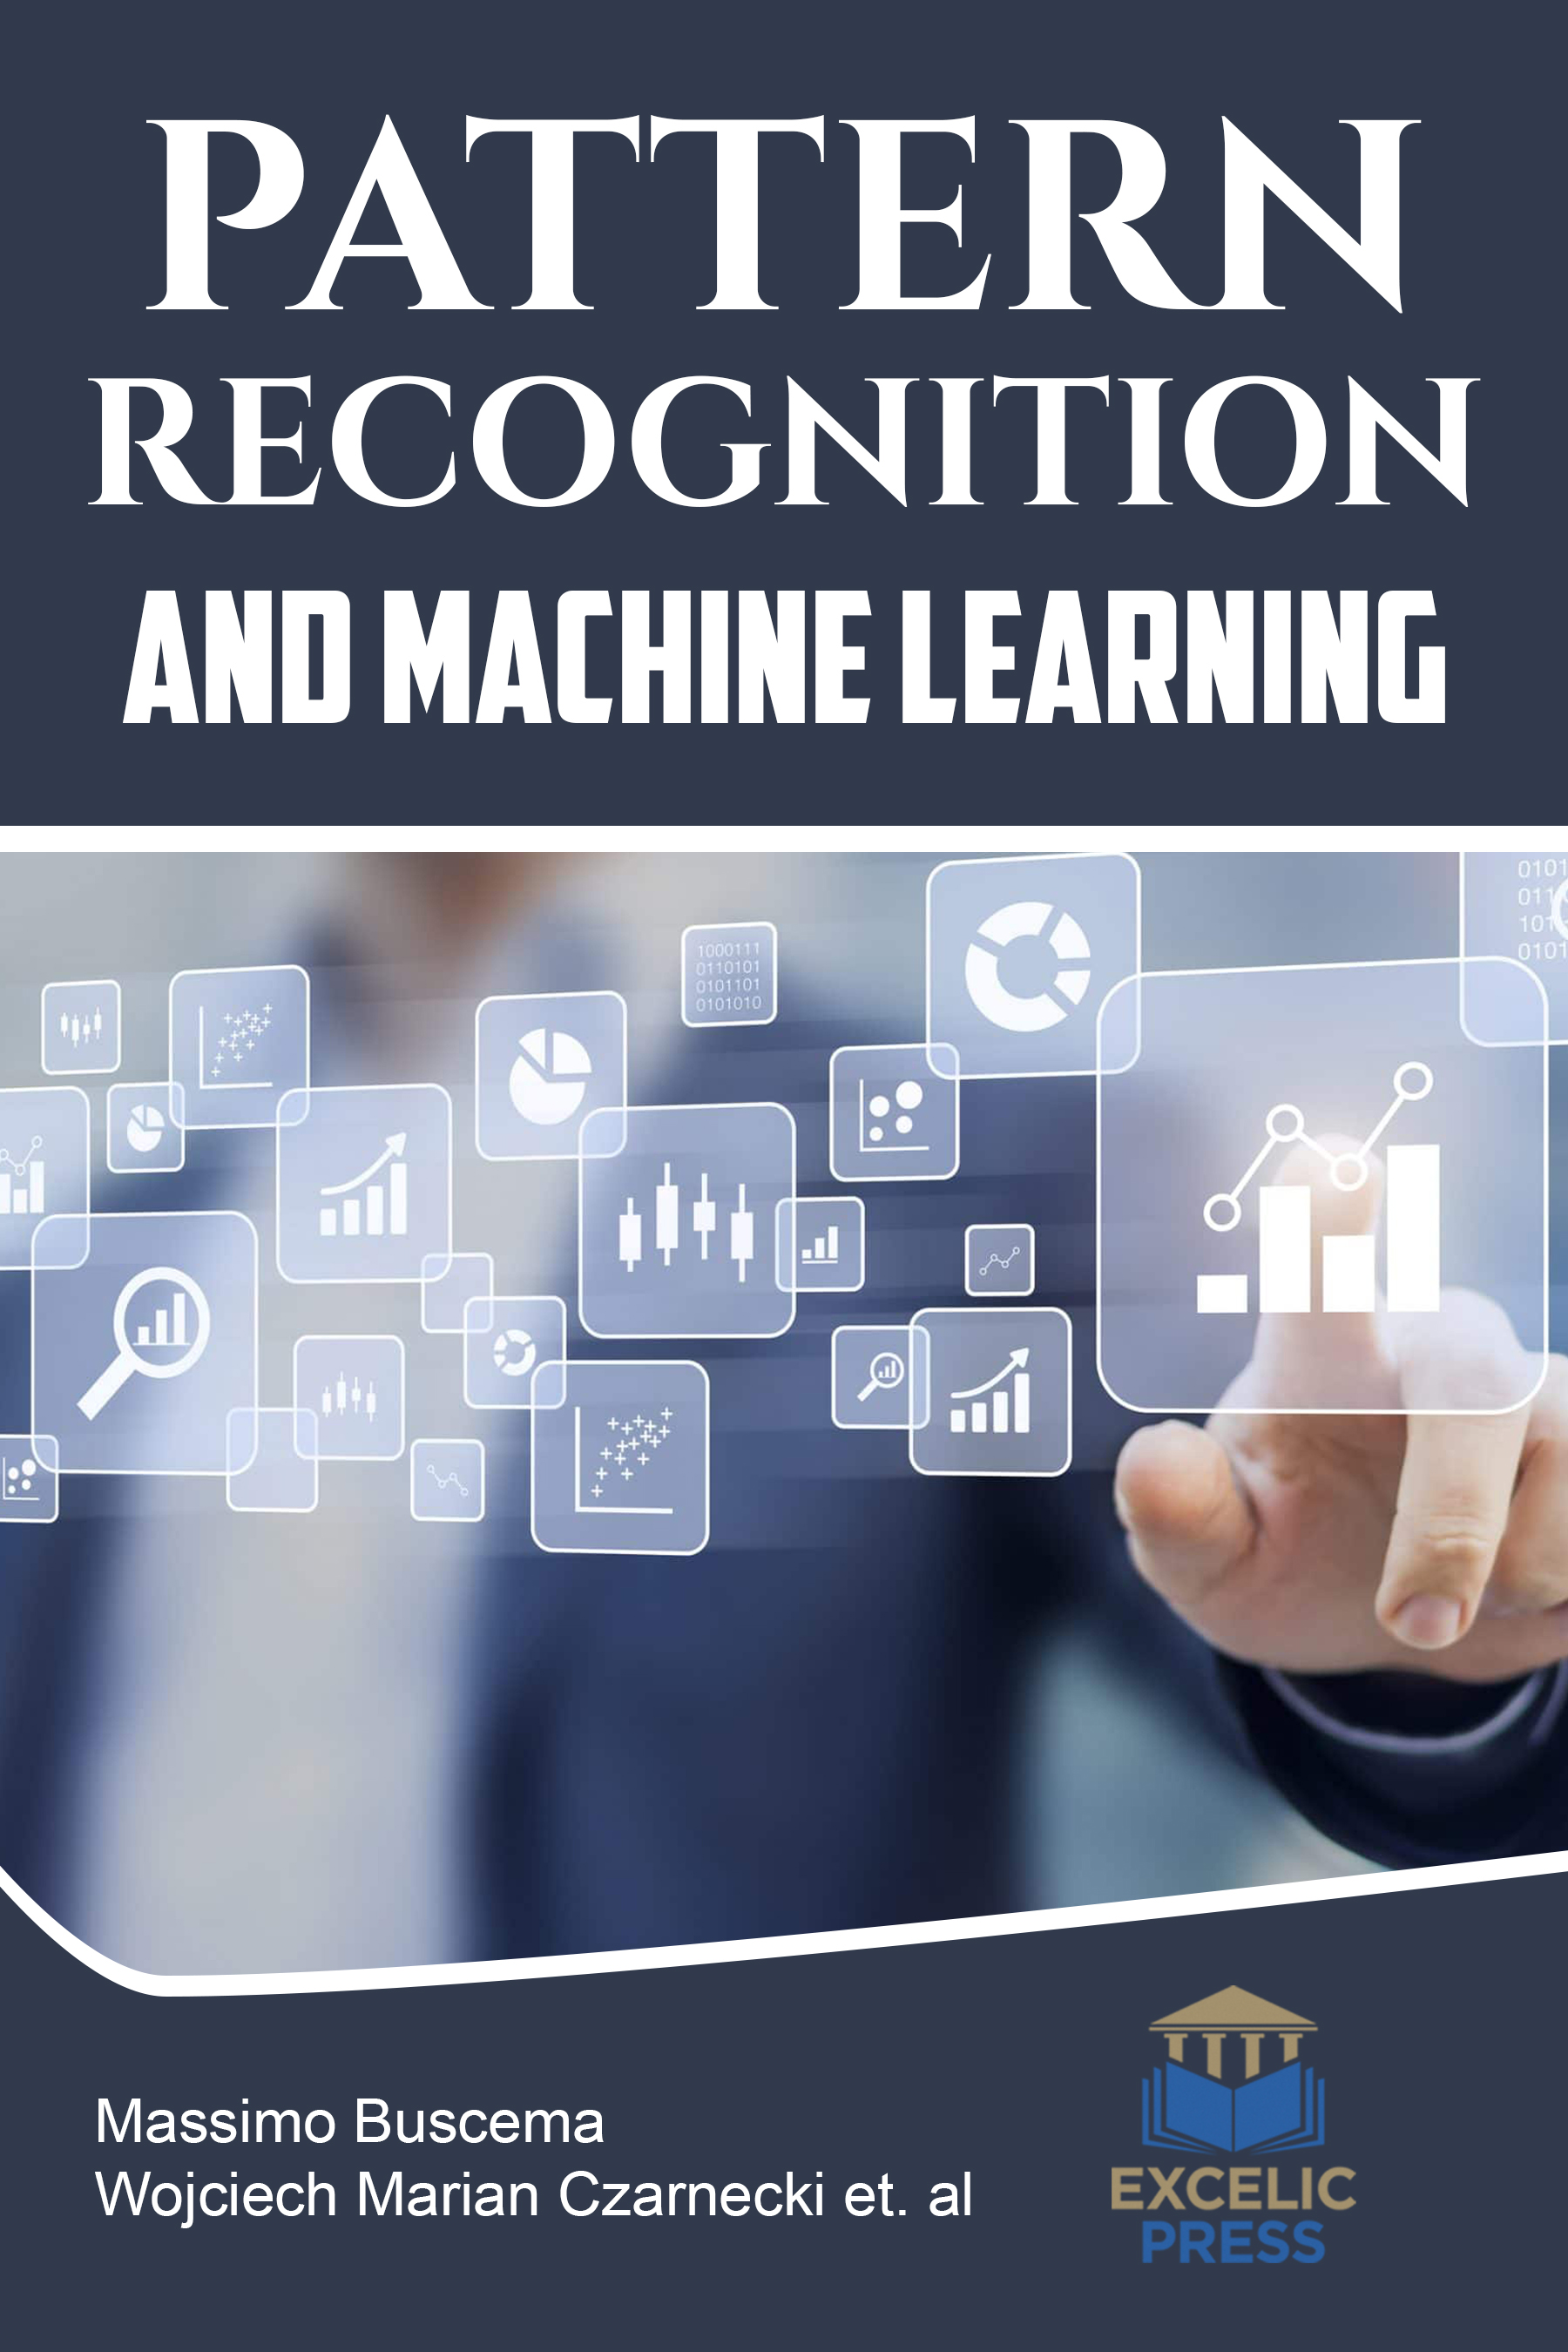 pattern recognition and machine learning research papers